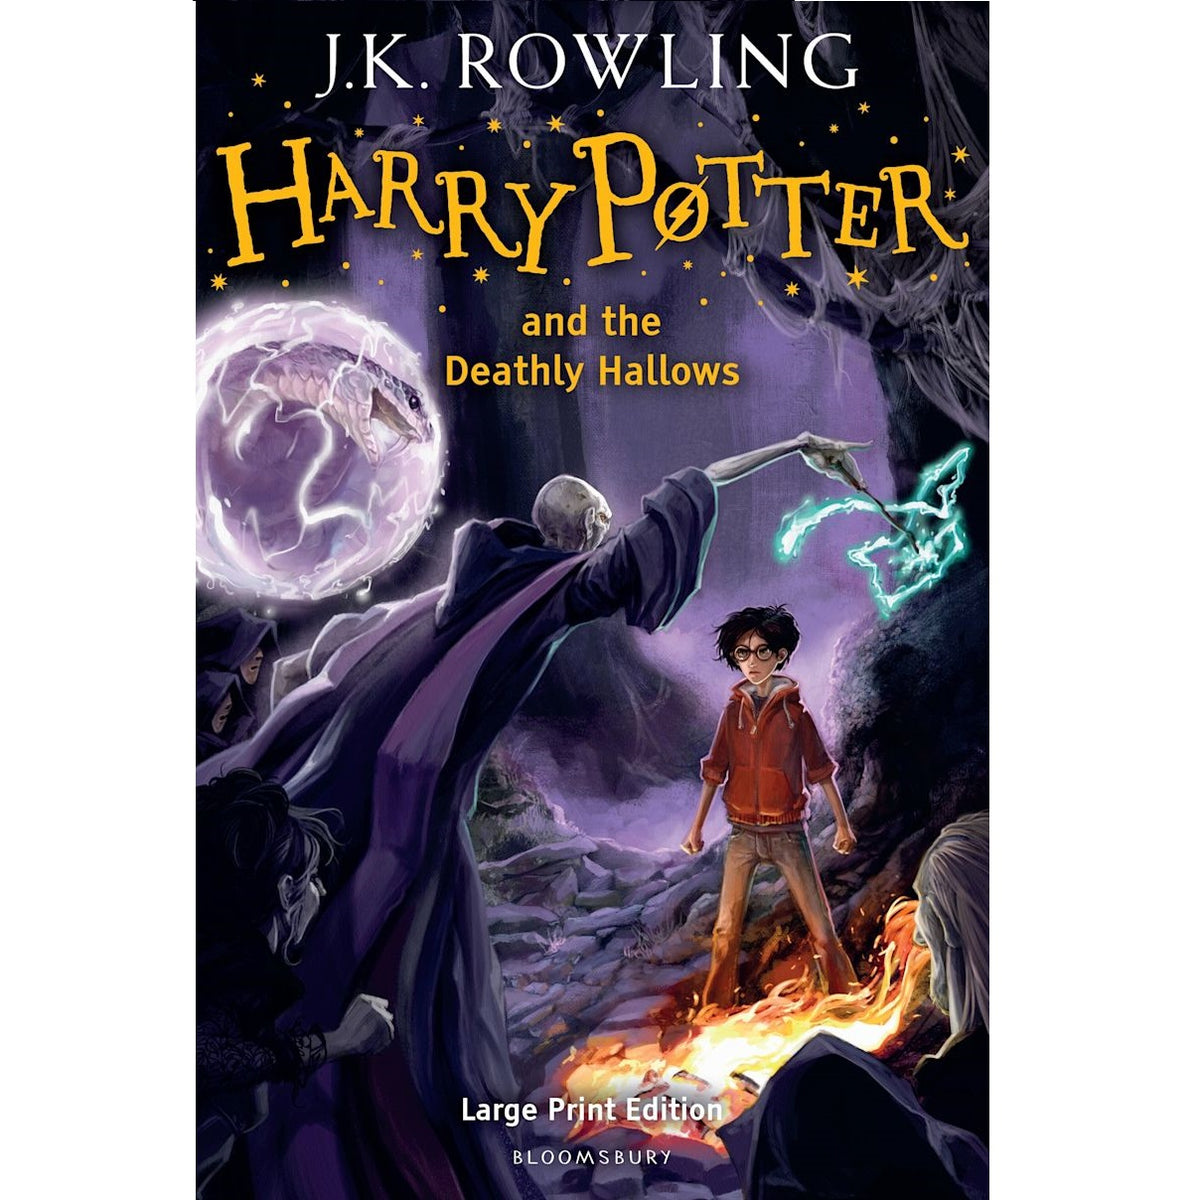 Harry Potter and The Deathly Hallows #7 (by J.K. Rowling) J.K. Rowling